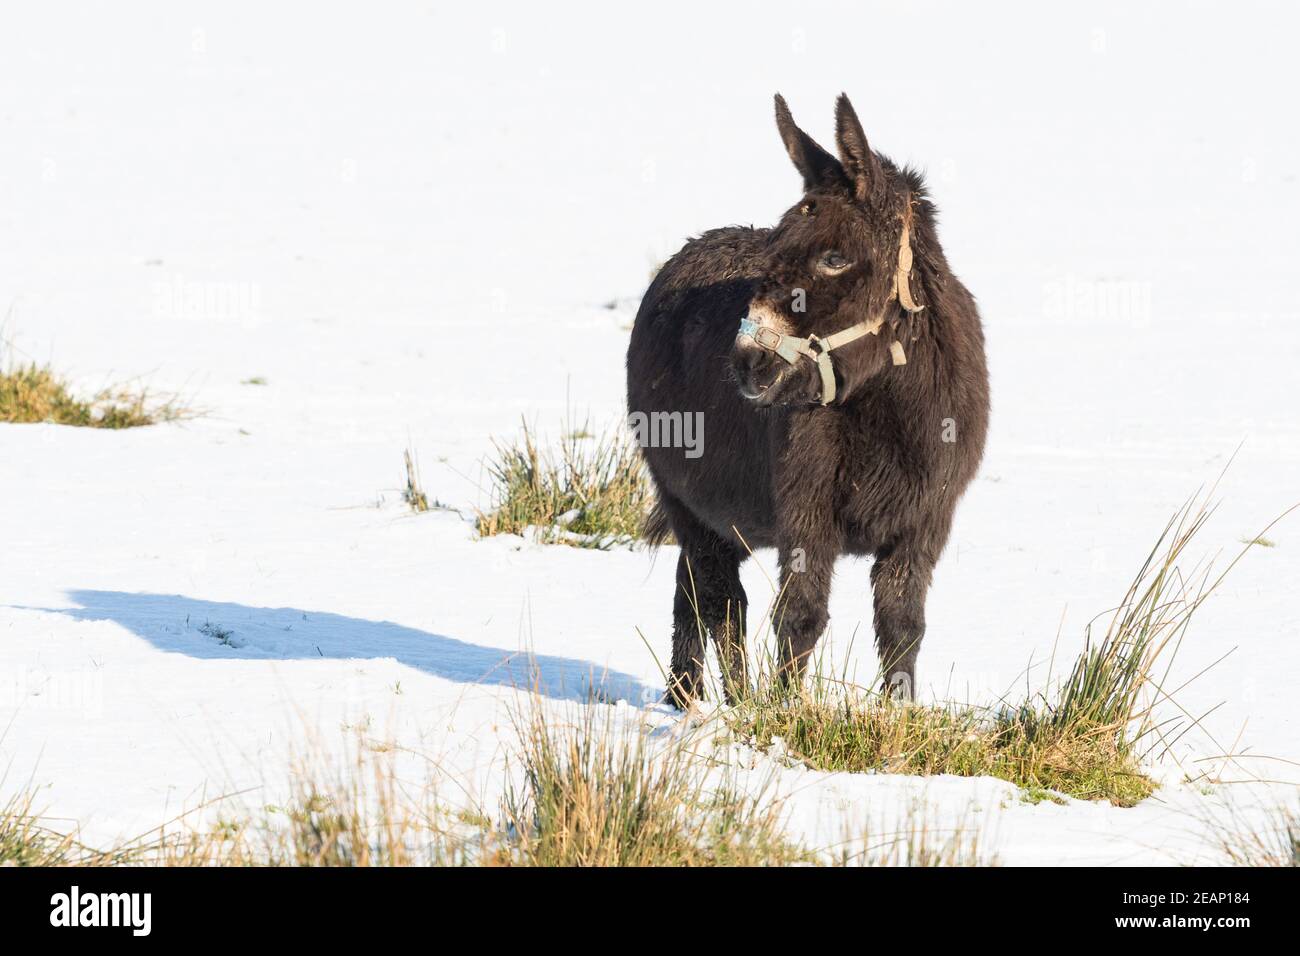 Gartness, Stirling, Scotland, UK. 10th Feb, 2021. UK weather - a donkey eating clumps of grass in an otherwise white snow covered field Credit: Kay Roxby/Alamy Live News Stock Photo